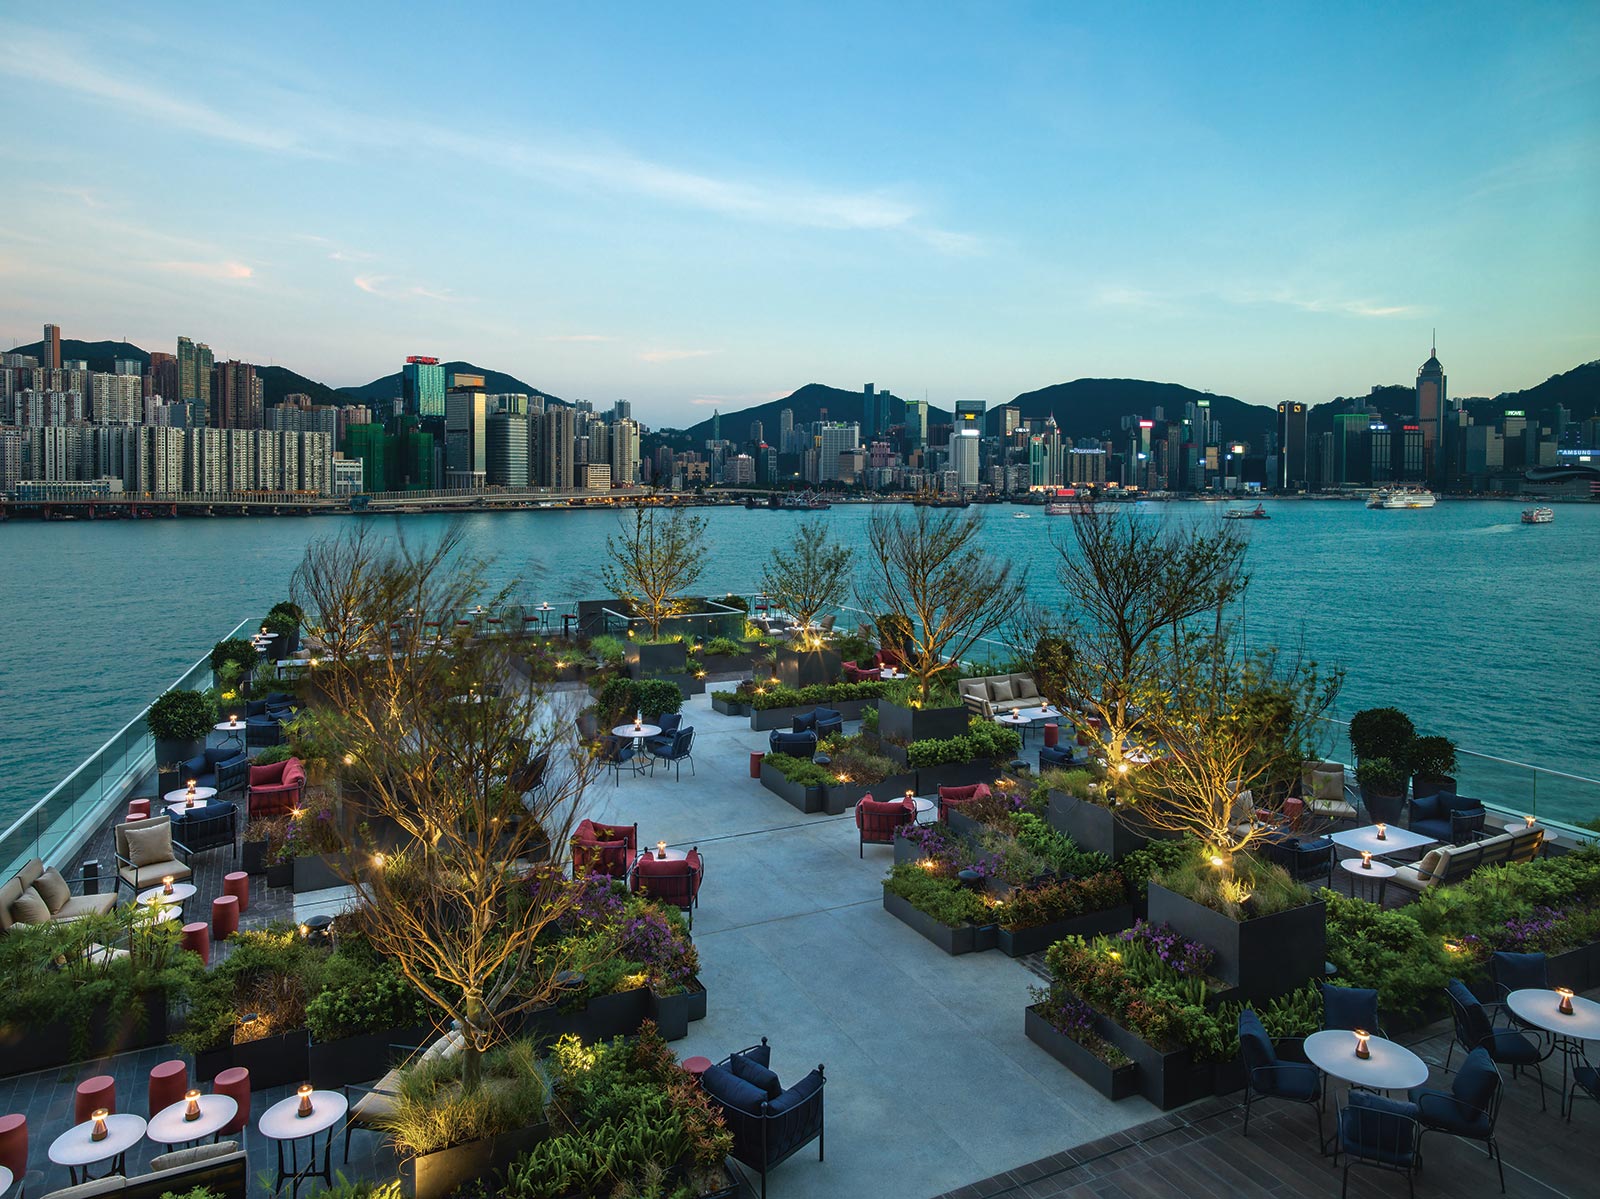 View of Victoria Harbour from Red Sugar Terrace at Hong Kong's Kerry Hotel